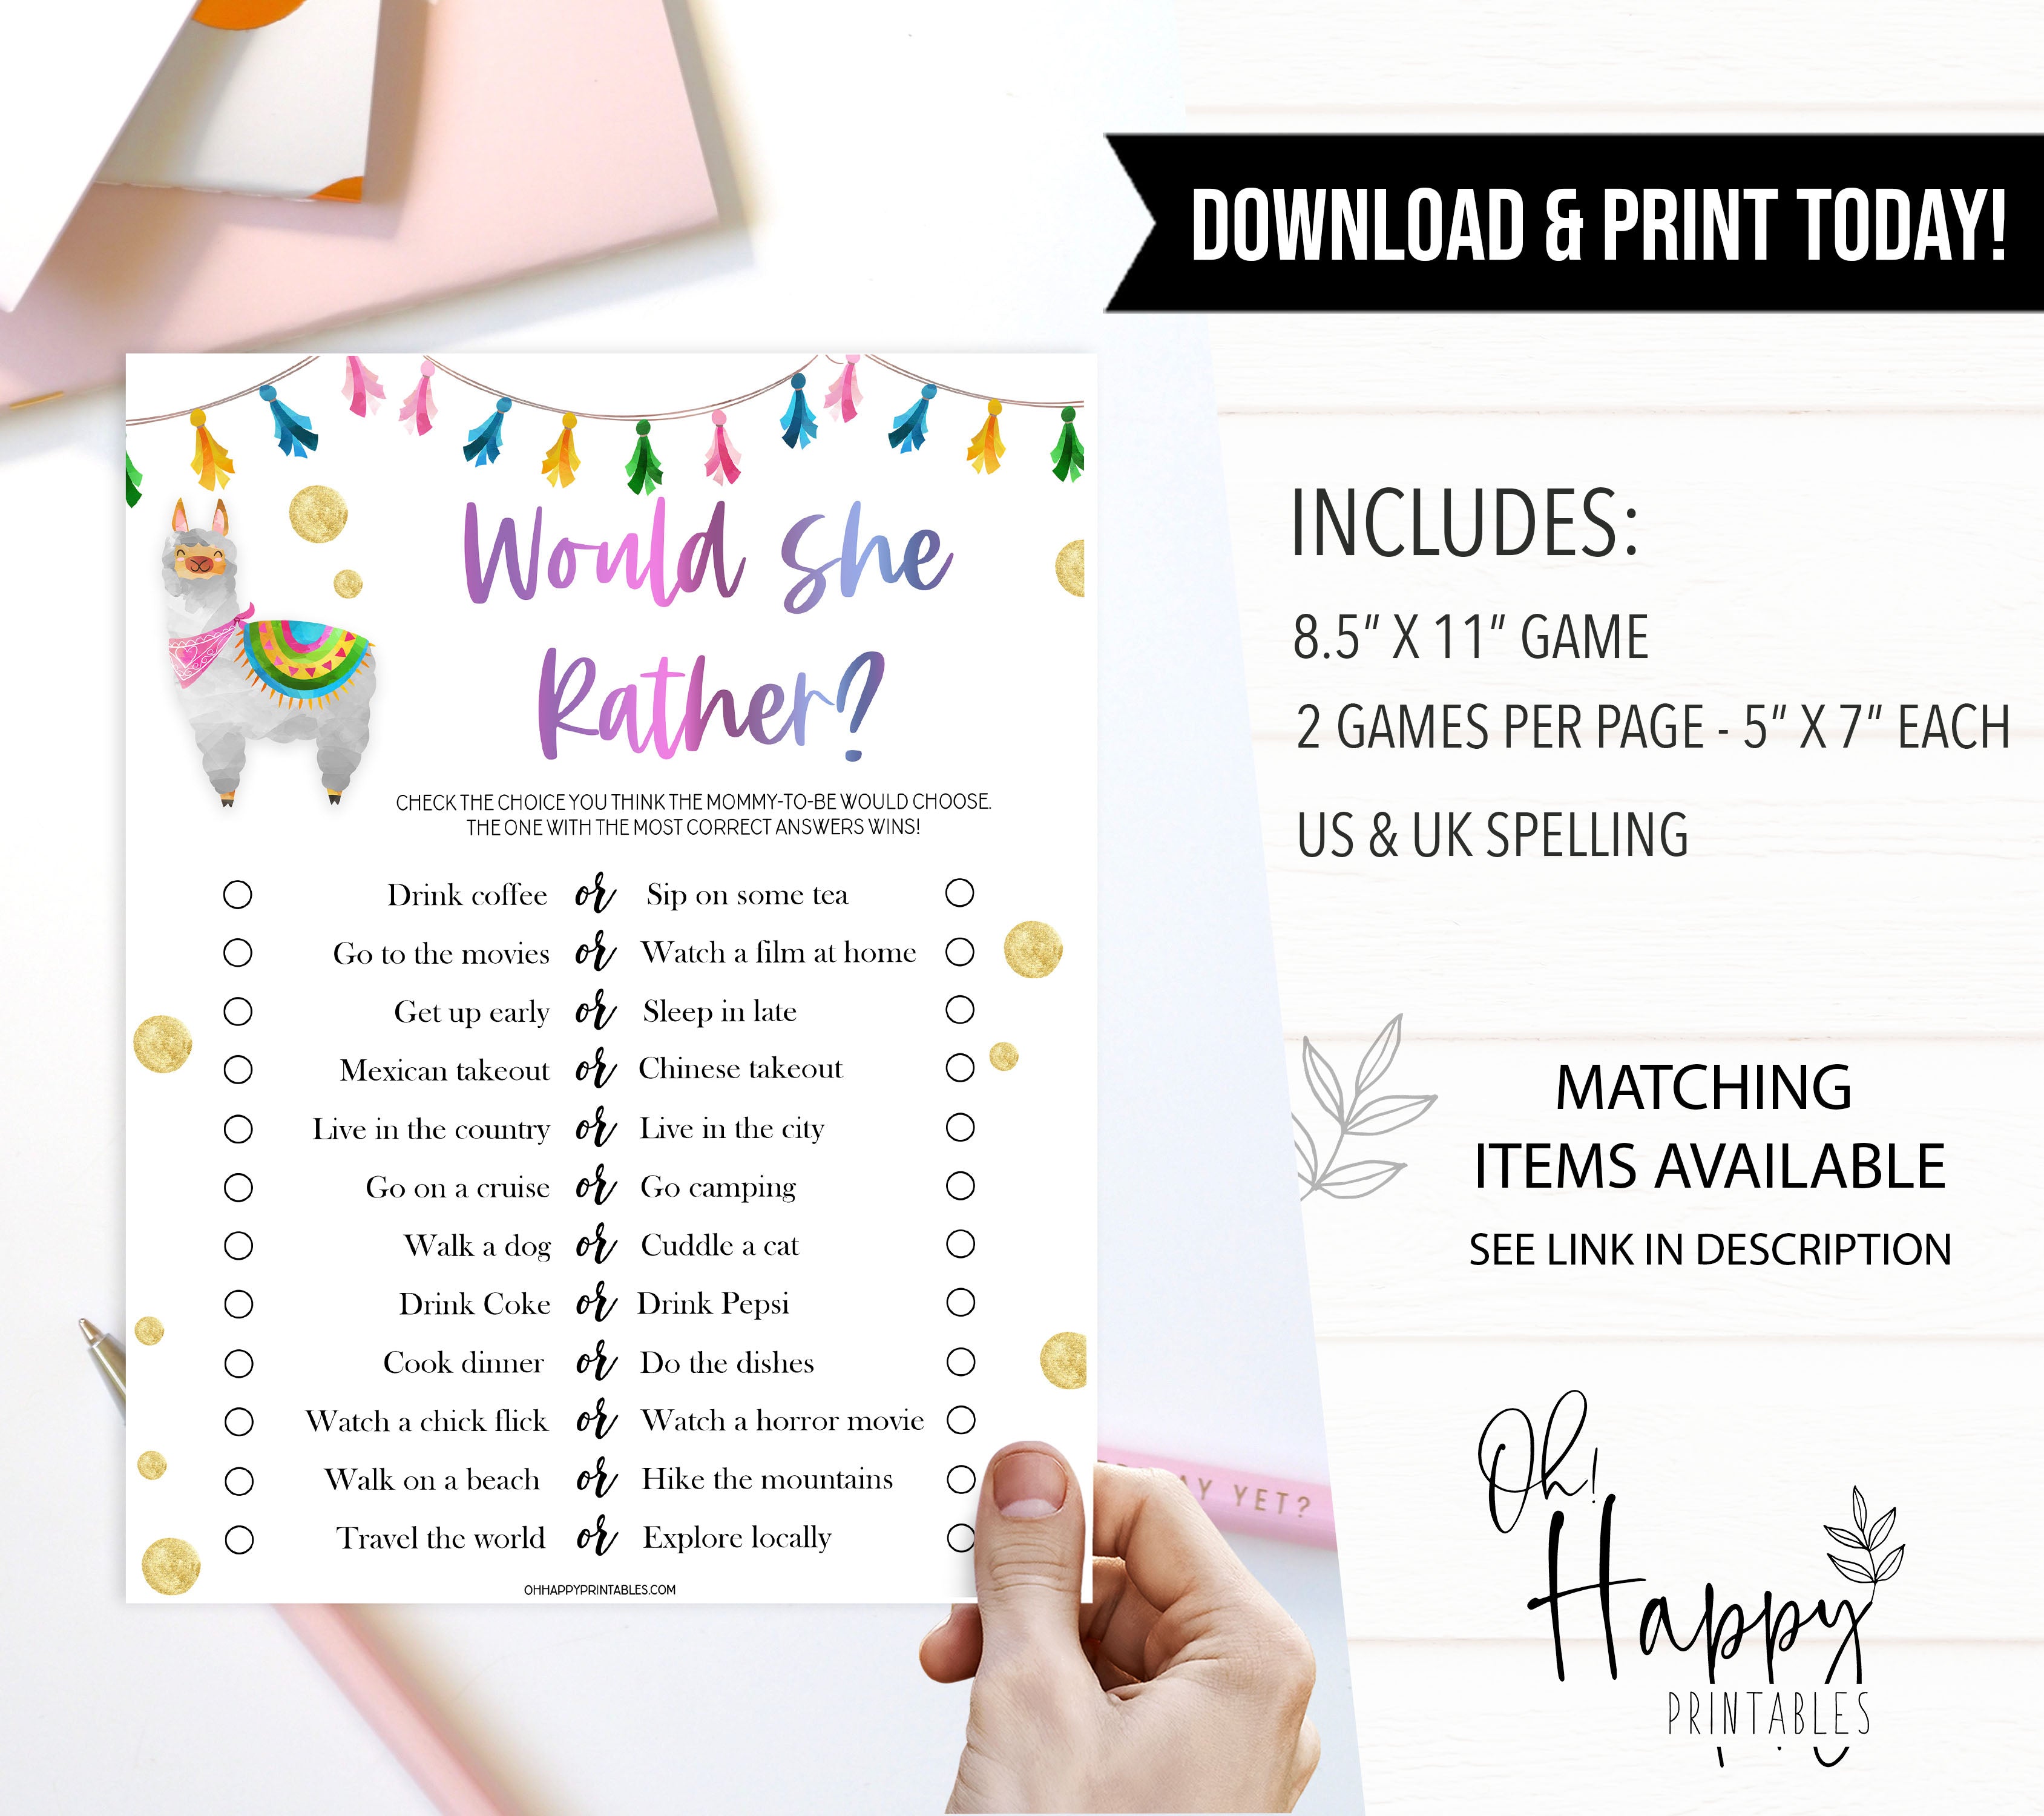 baby shower would she rather, would she rather game, Printable baby shower games, llama fiesta fun baby games, baby shower games, fun baby shower ideas, top baby shower ideas, Llama fiesta shower baby shower, fiesta baby shower ideas